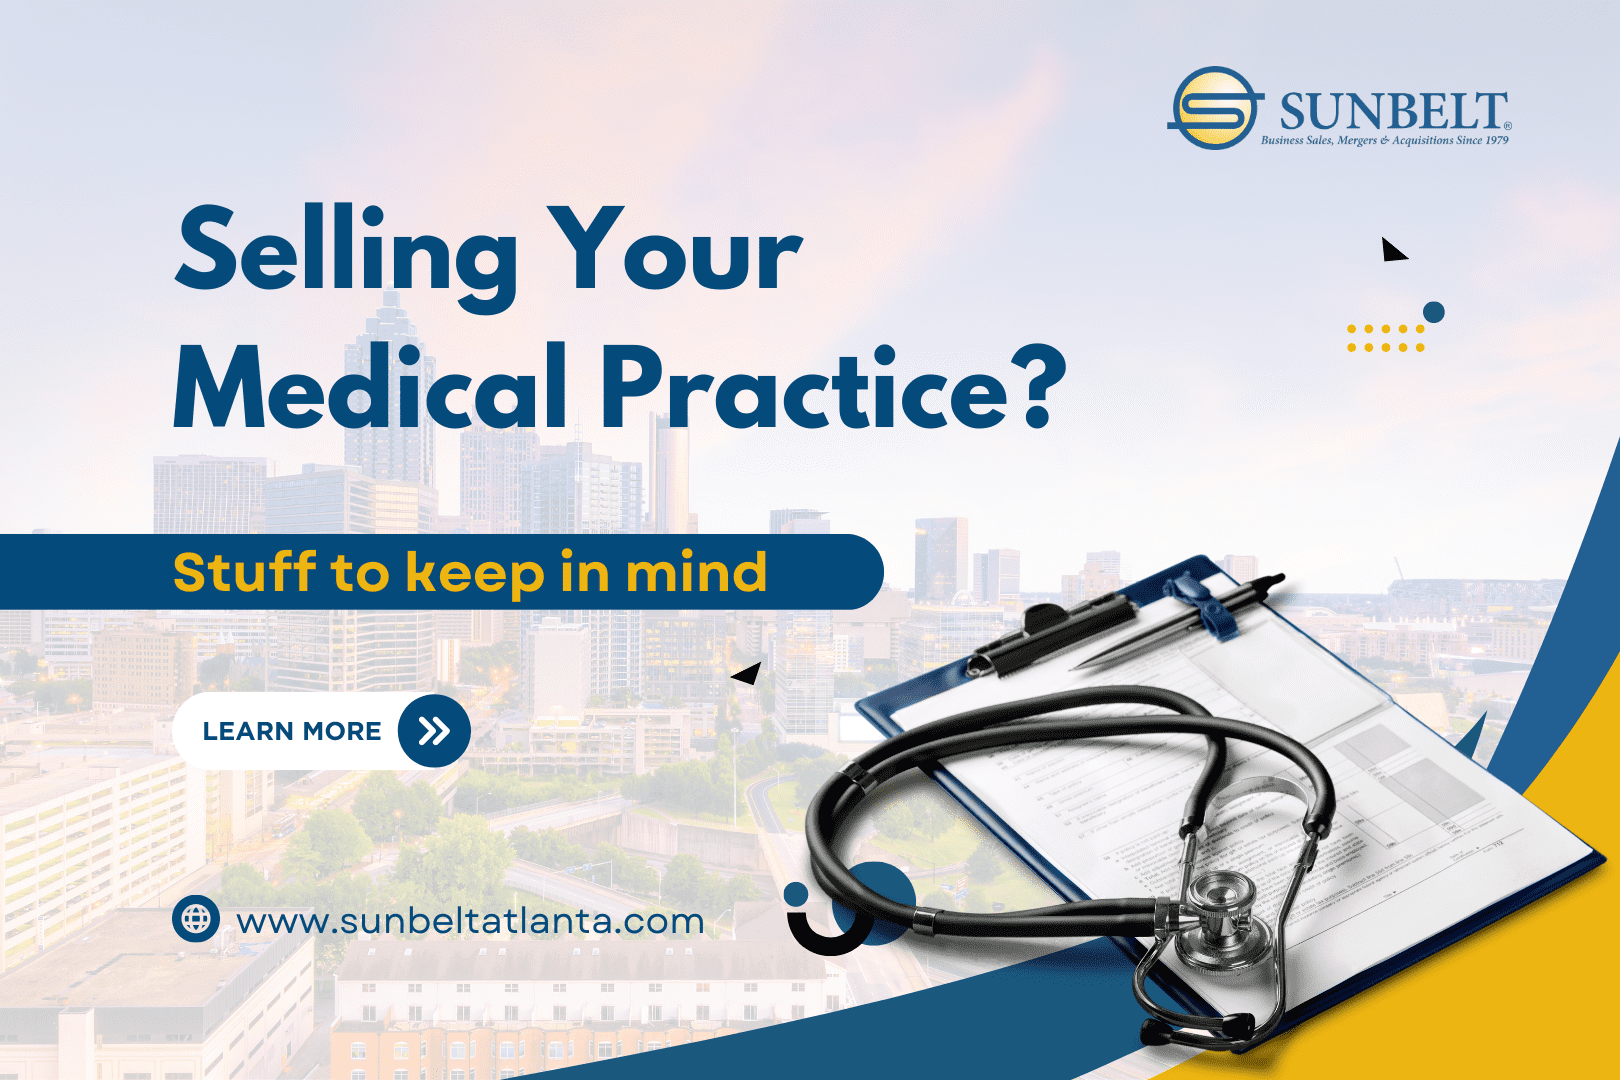 Selling Your Medical Practice? Here Are Some Things to Consider